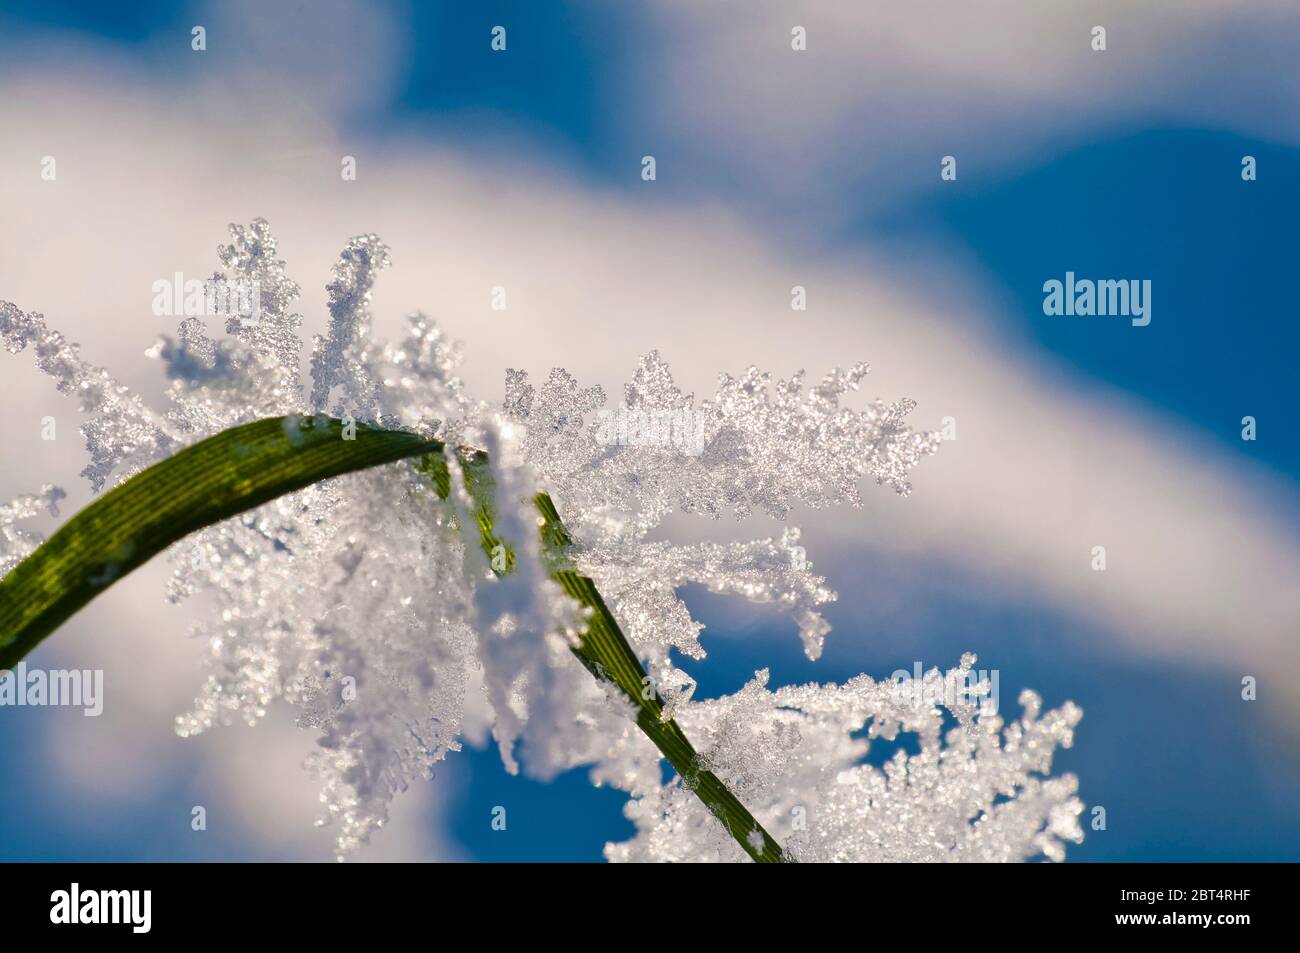 ice crystals on blade of grass Stock Photo